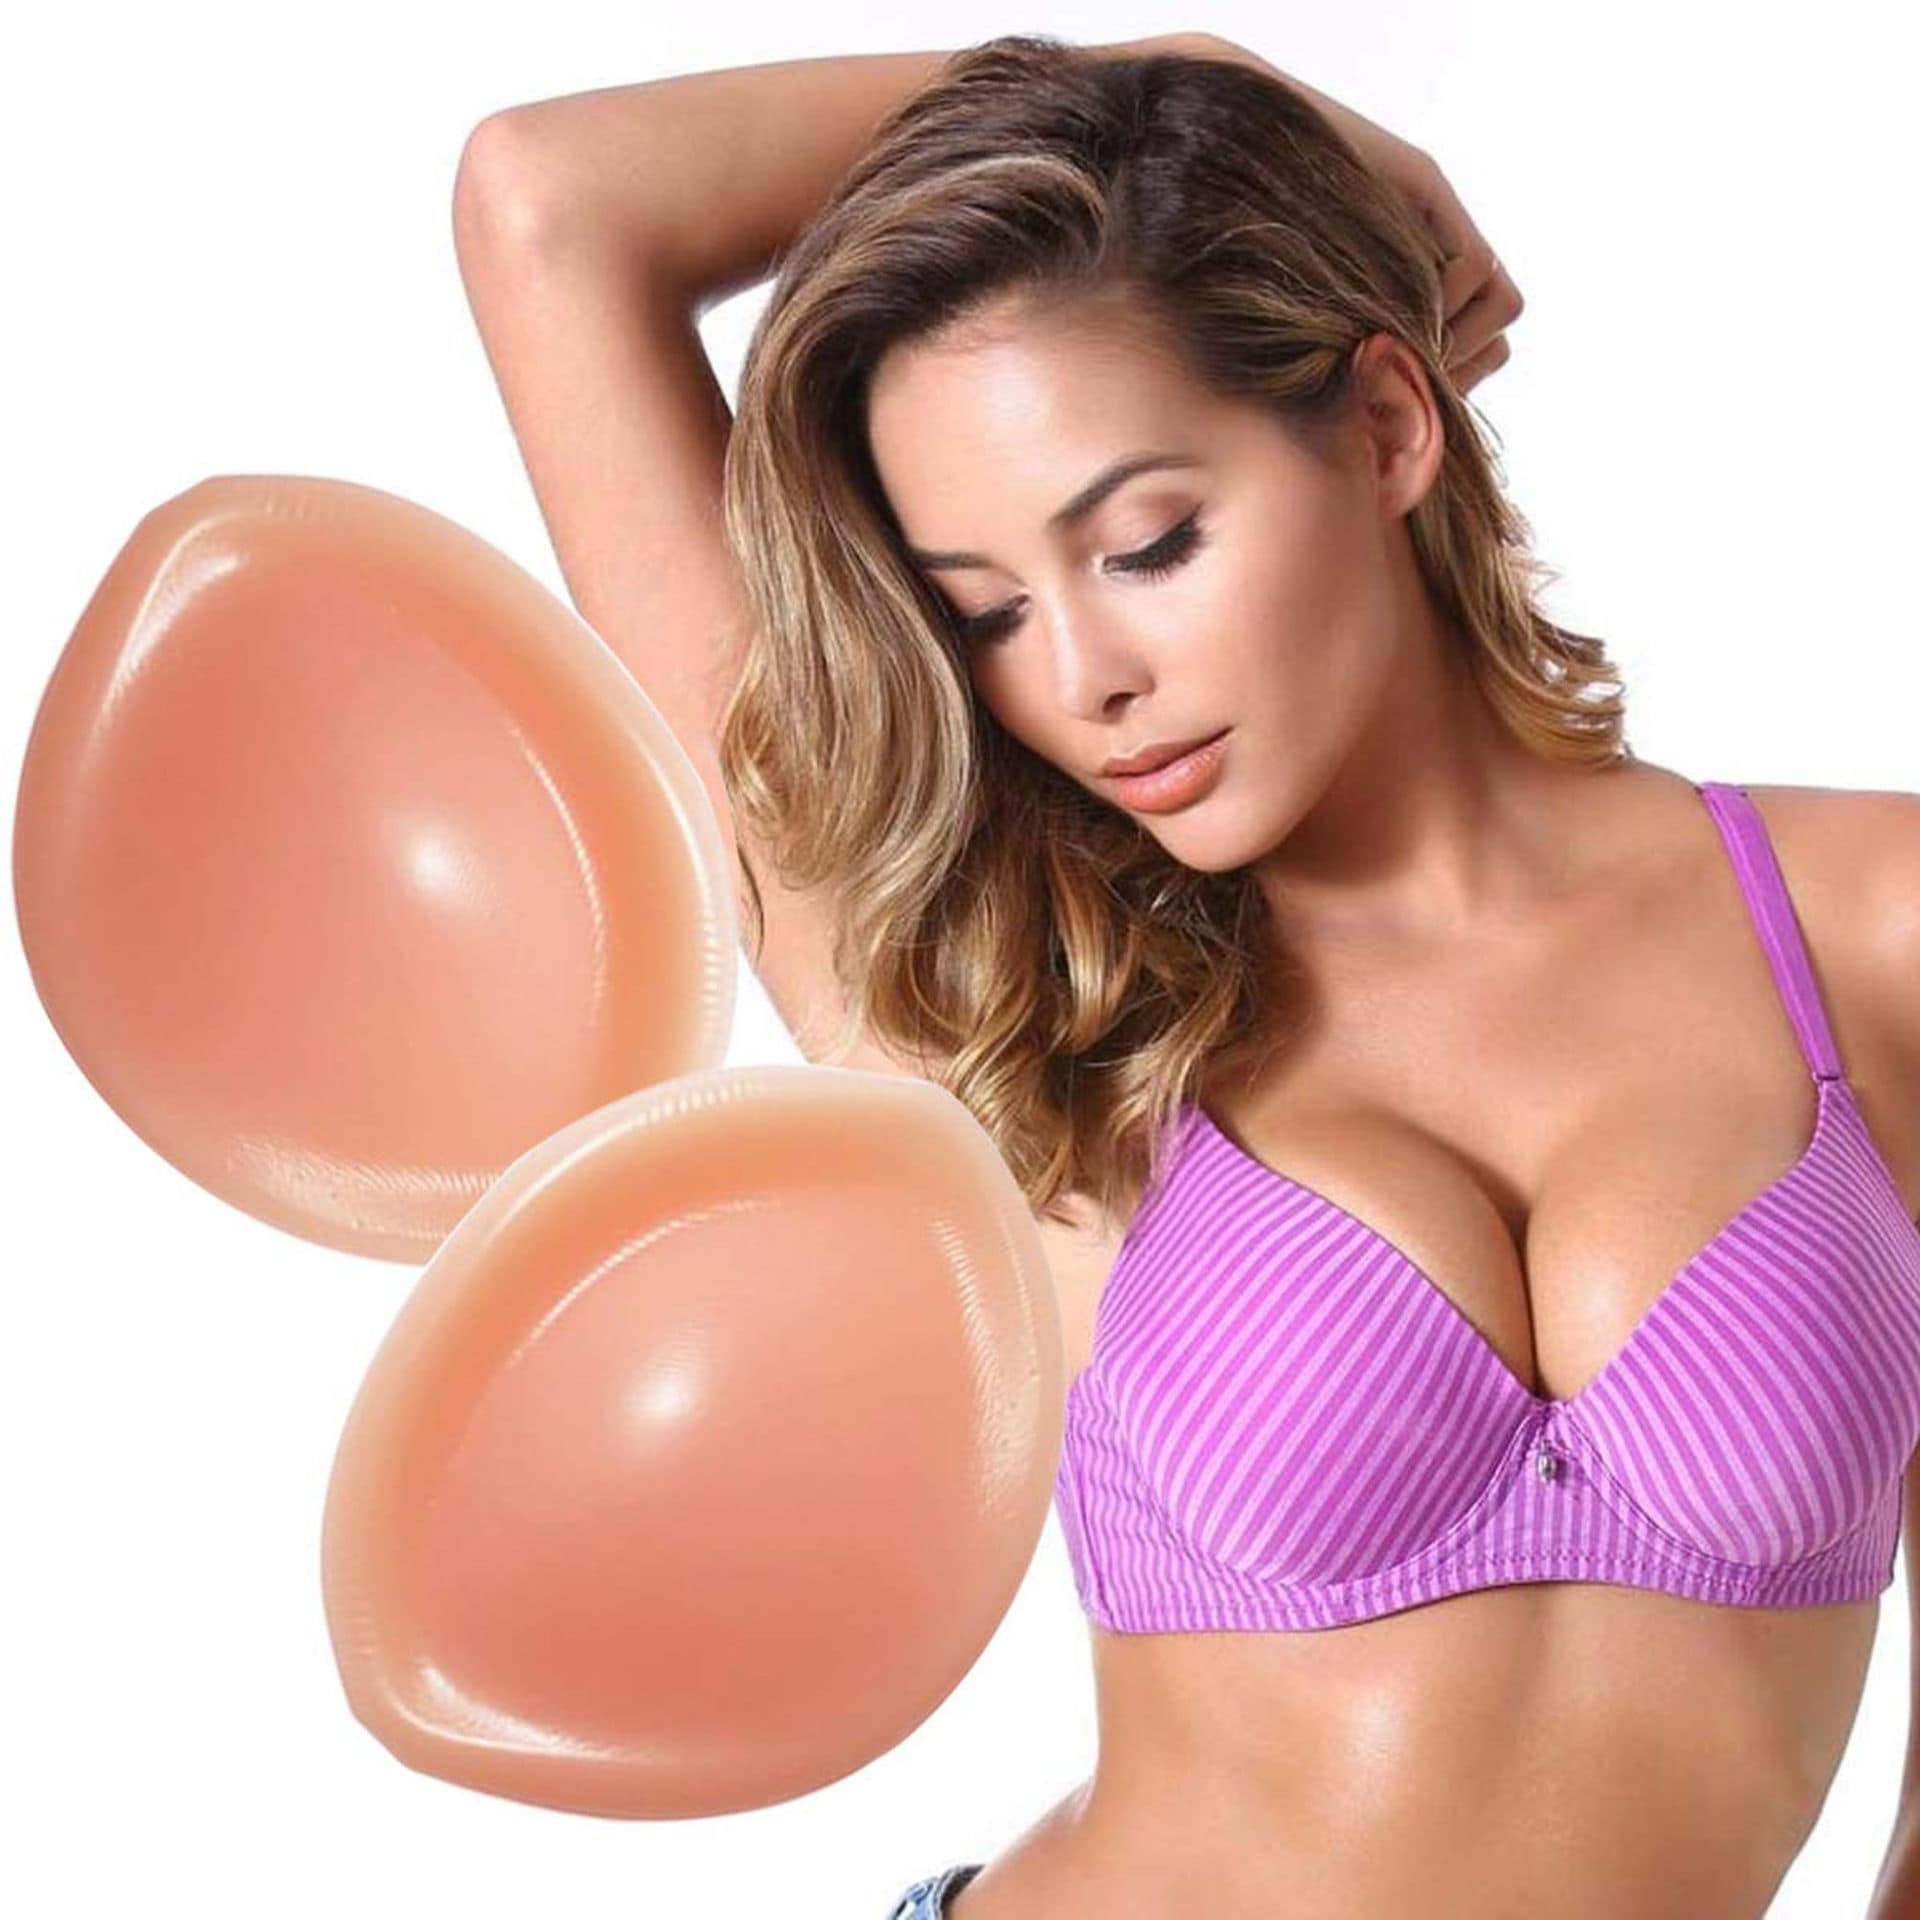 https://assets.dragonmart.ae//pictures/0713224_naor-women-soft-silicone-breast-chest-enhancers-push-upgathering-pads-1-pair.jpeg